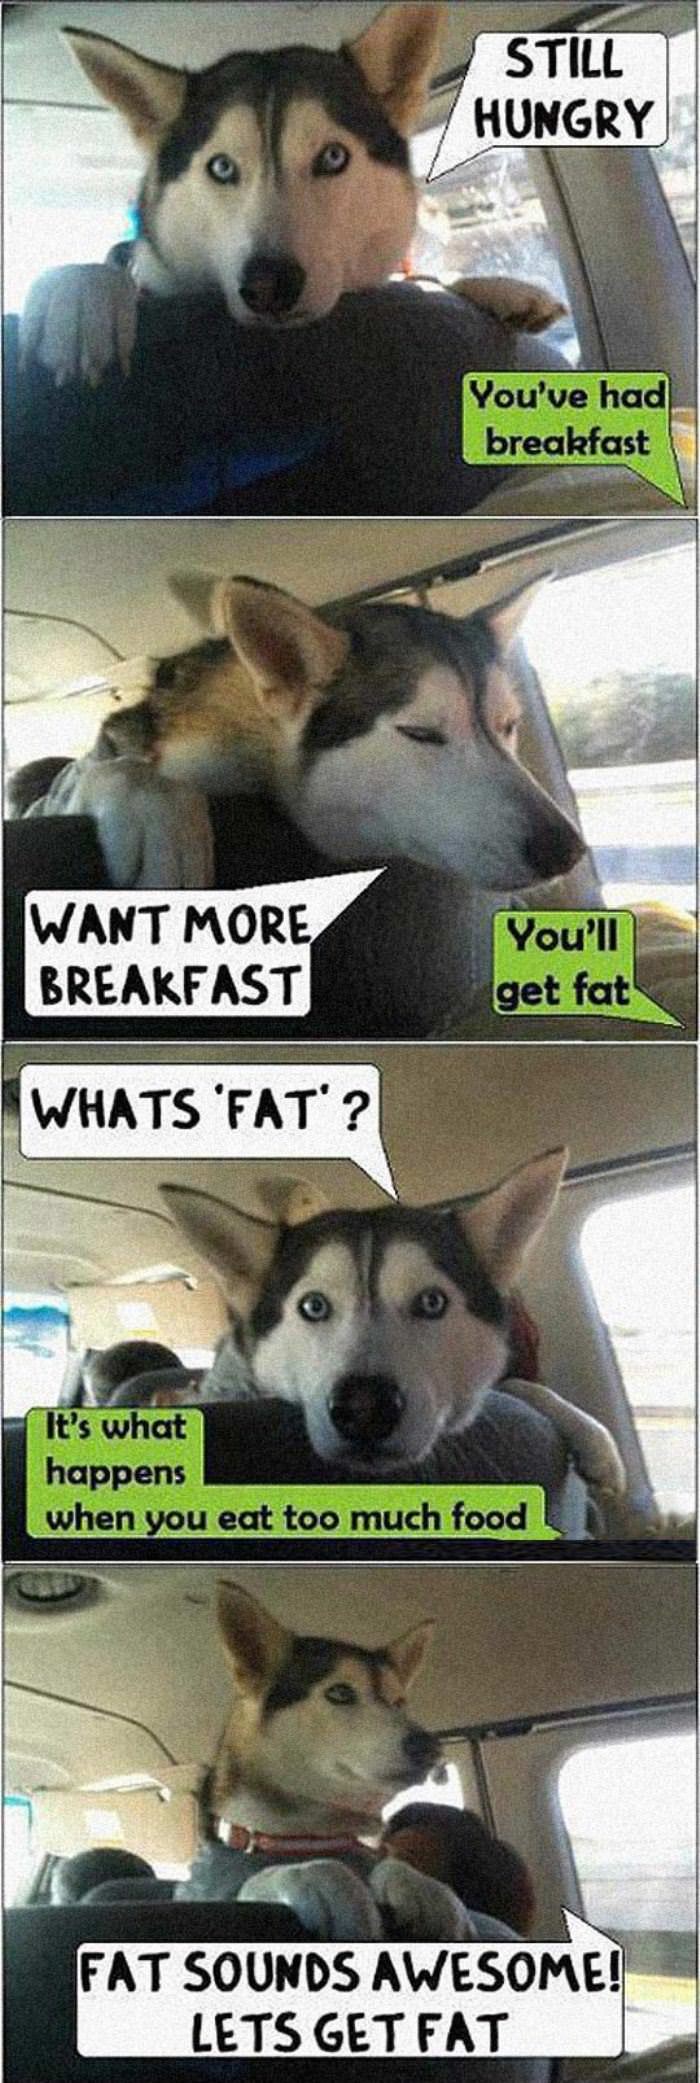 can we get breakfast funny picture